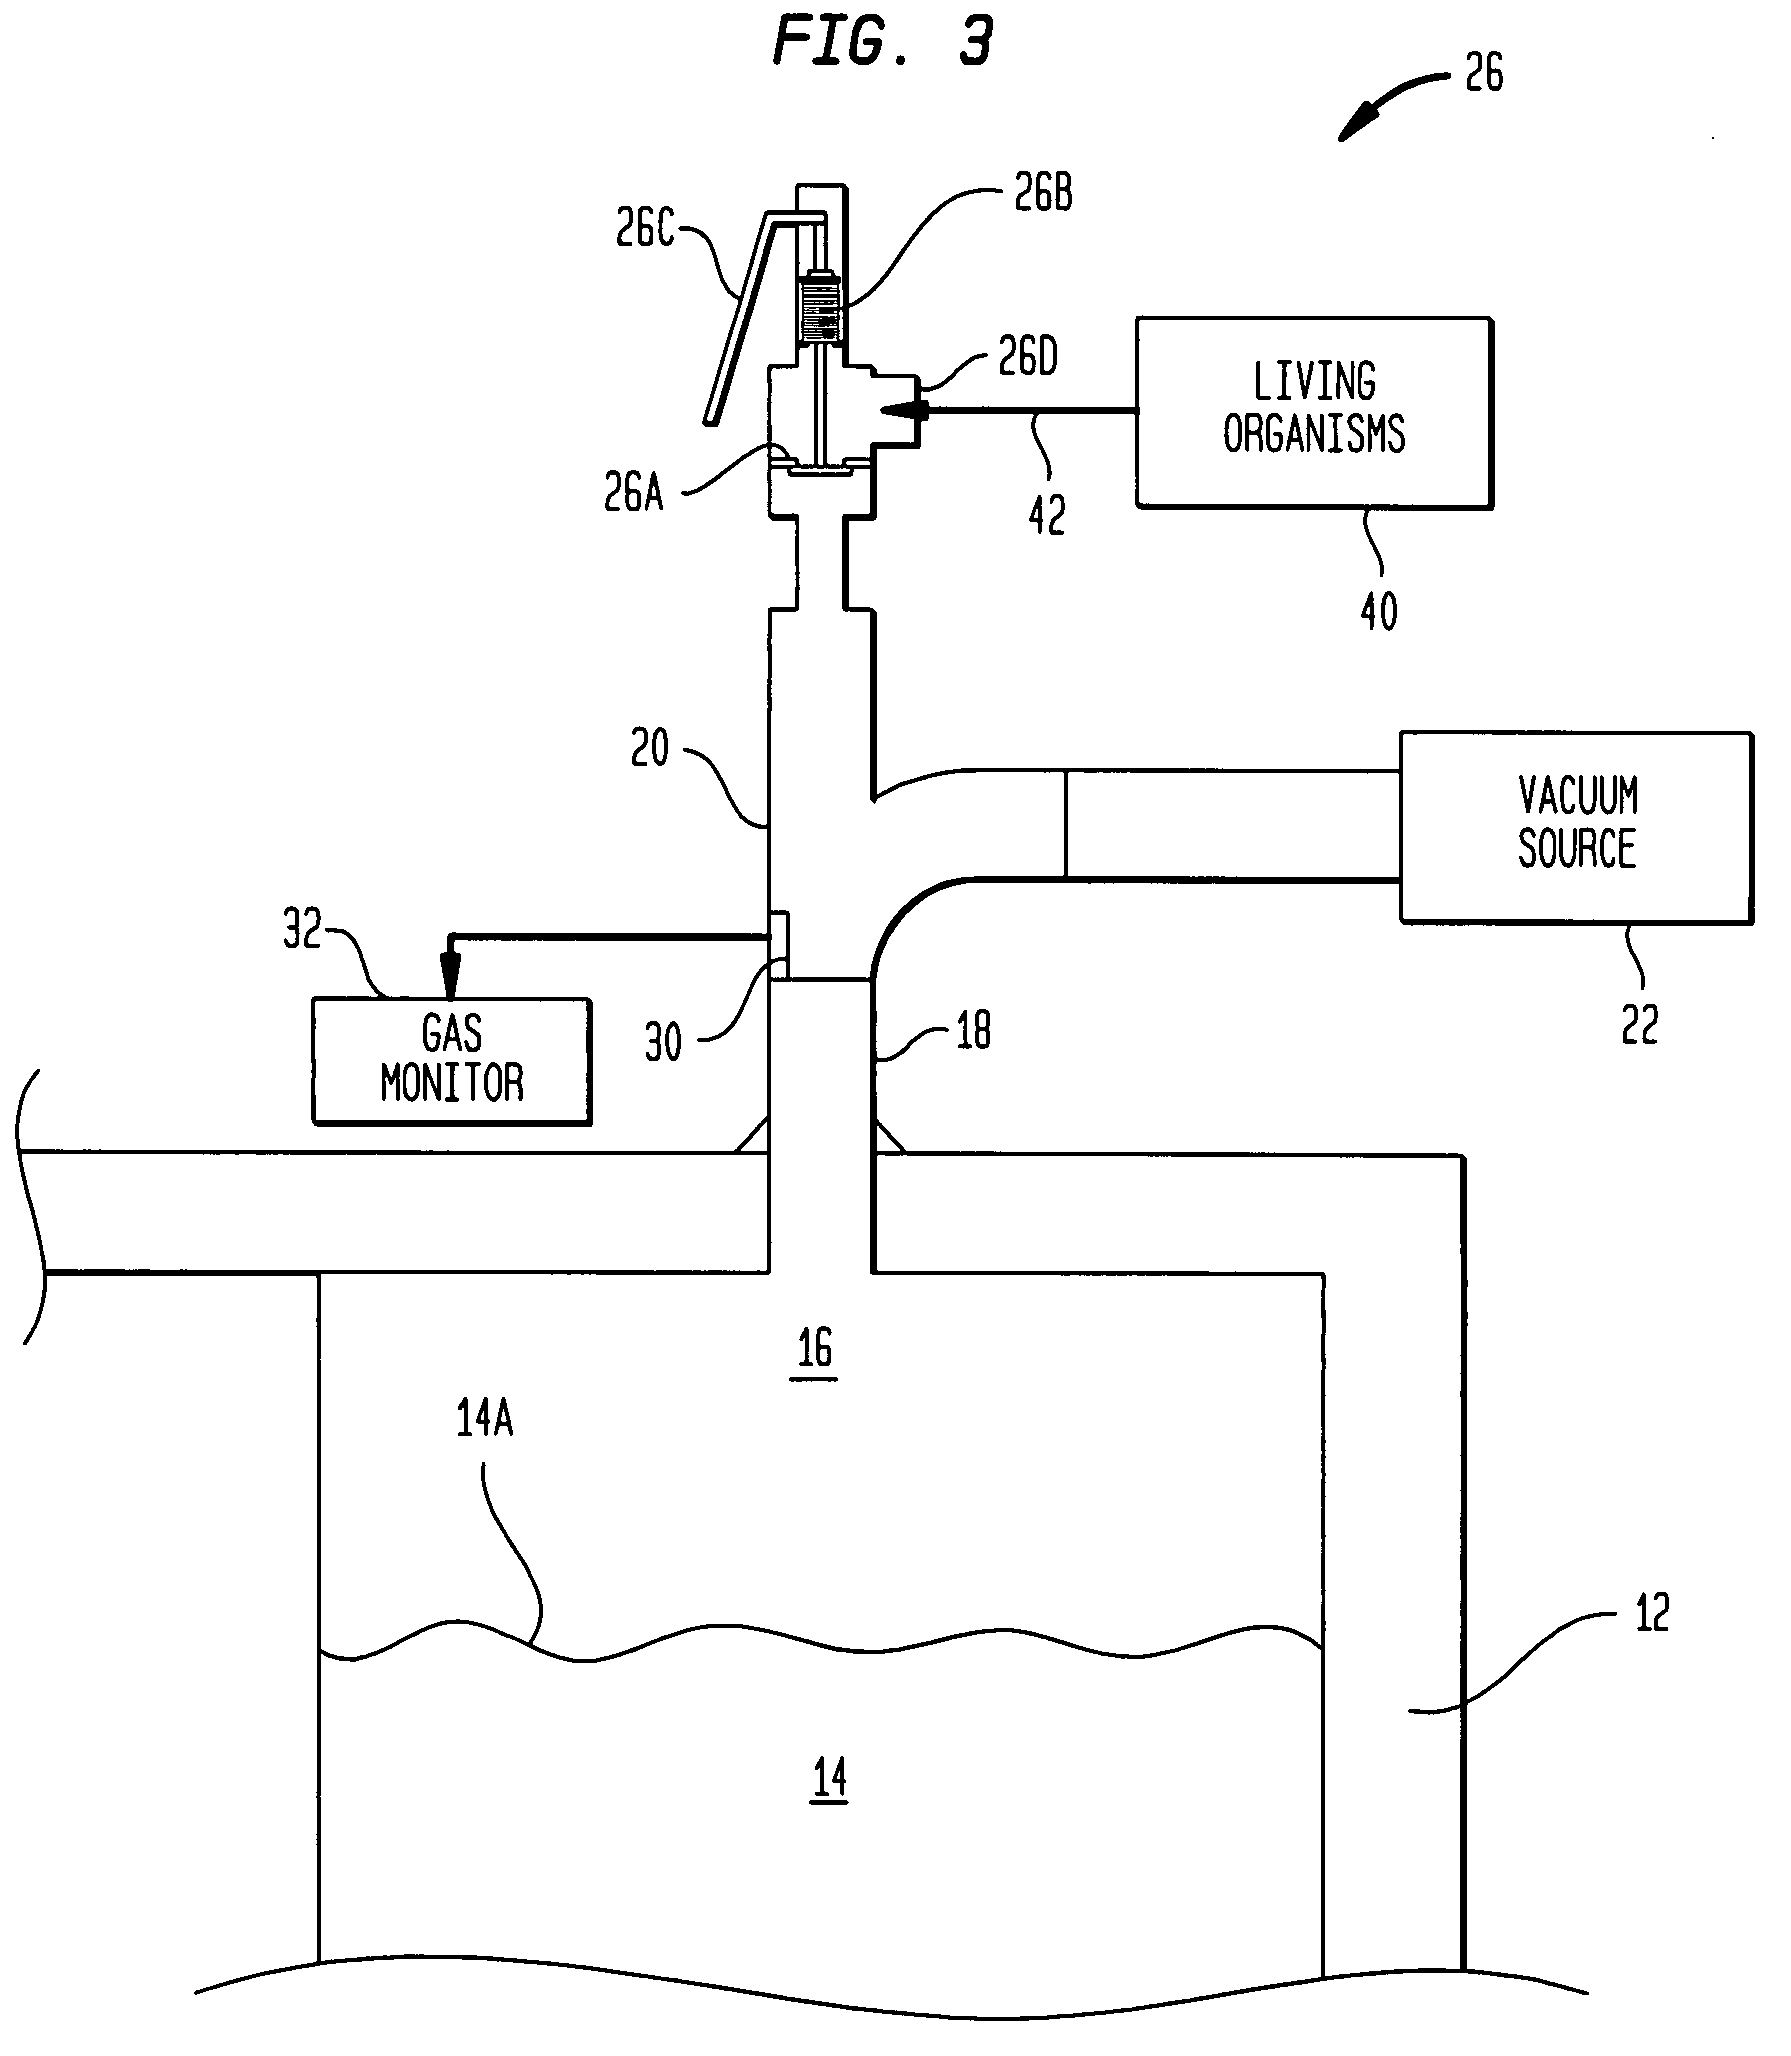 "In-situ" ballast water treatment system and method